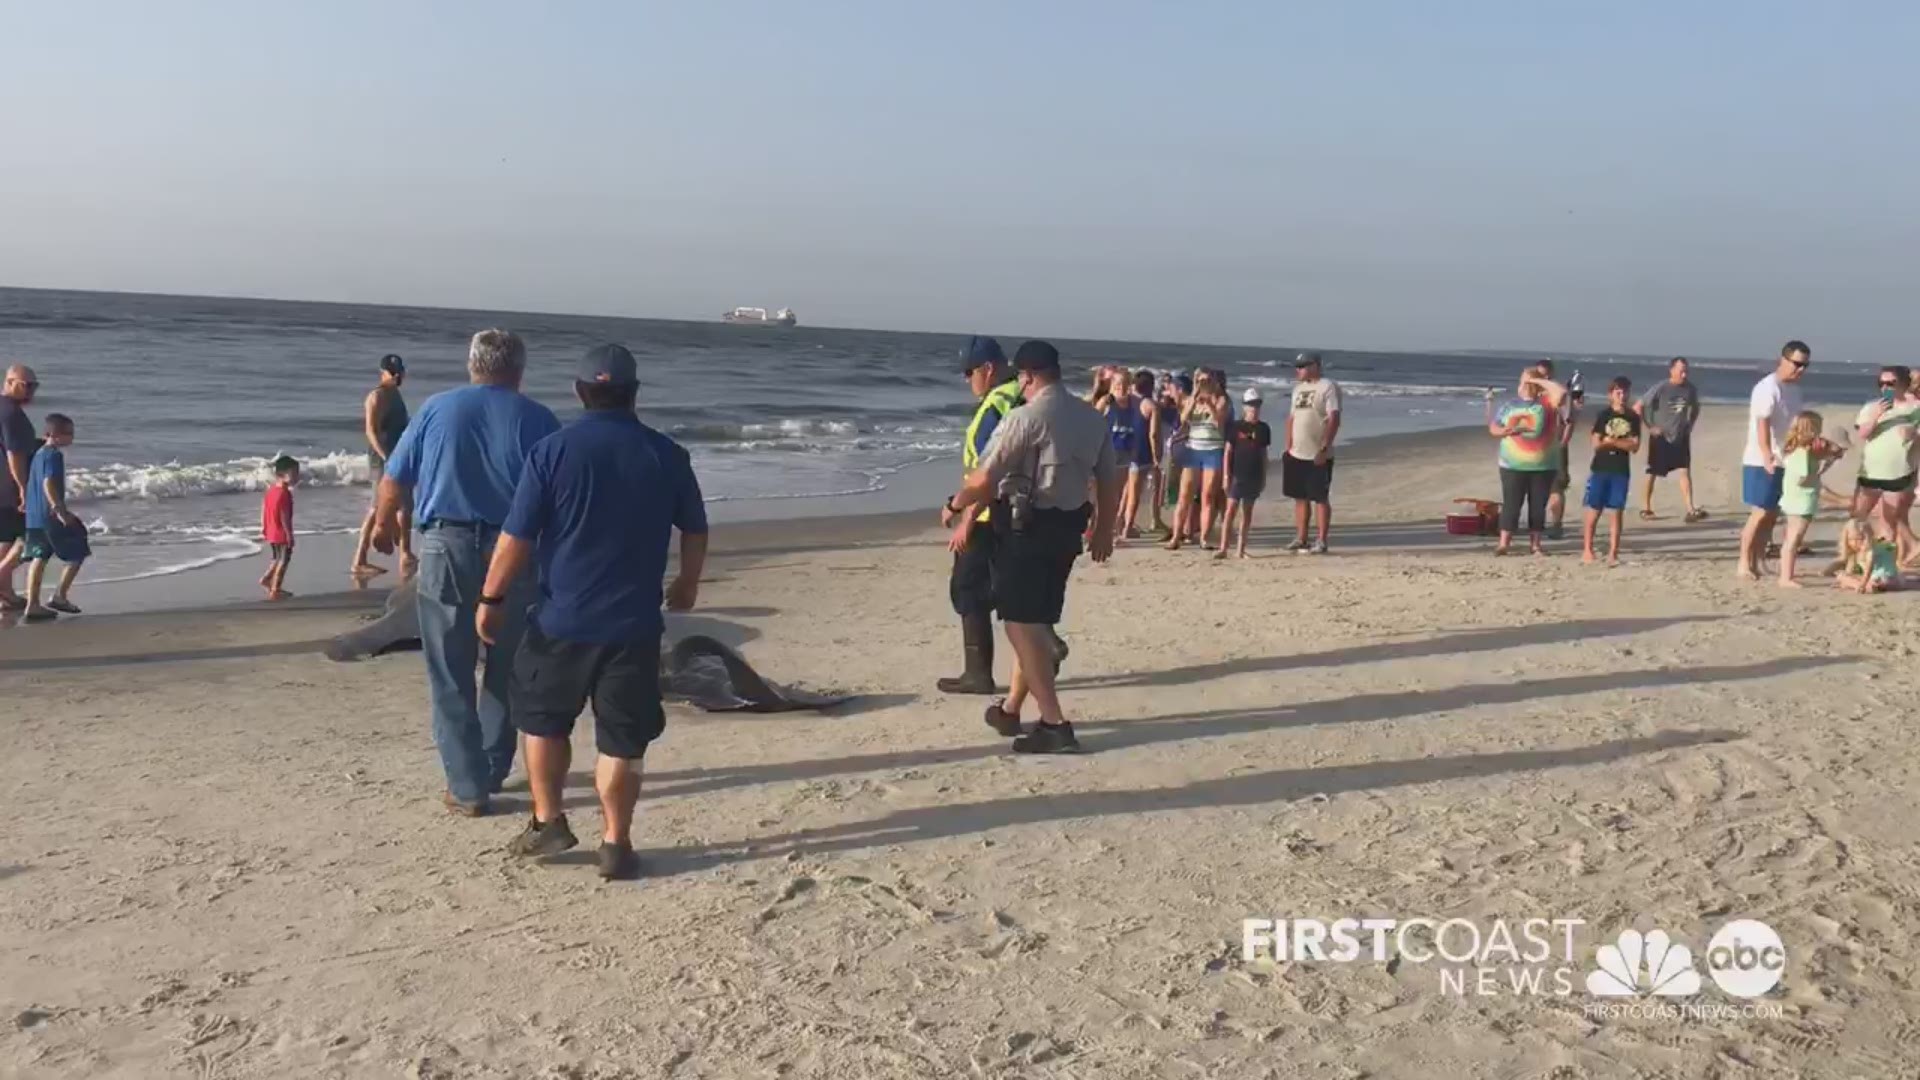 If you see a beached or stranded whale, call 1-877-WHALE-HELP.